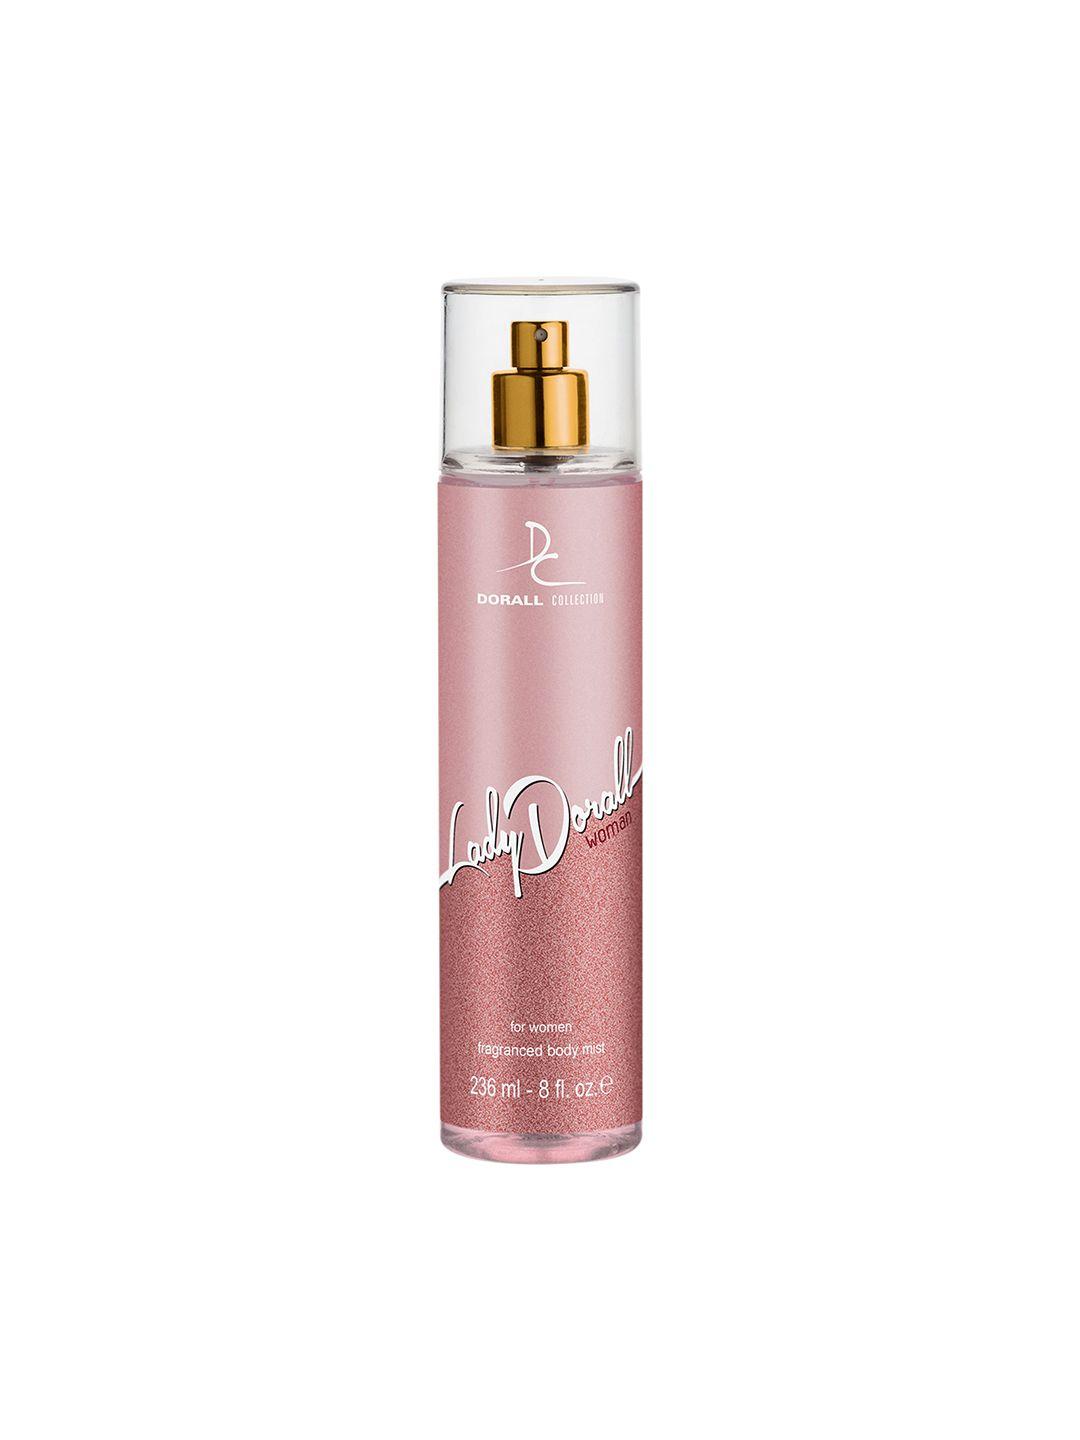 dorall collection women lady doral fragranced body mist - 236ml